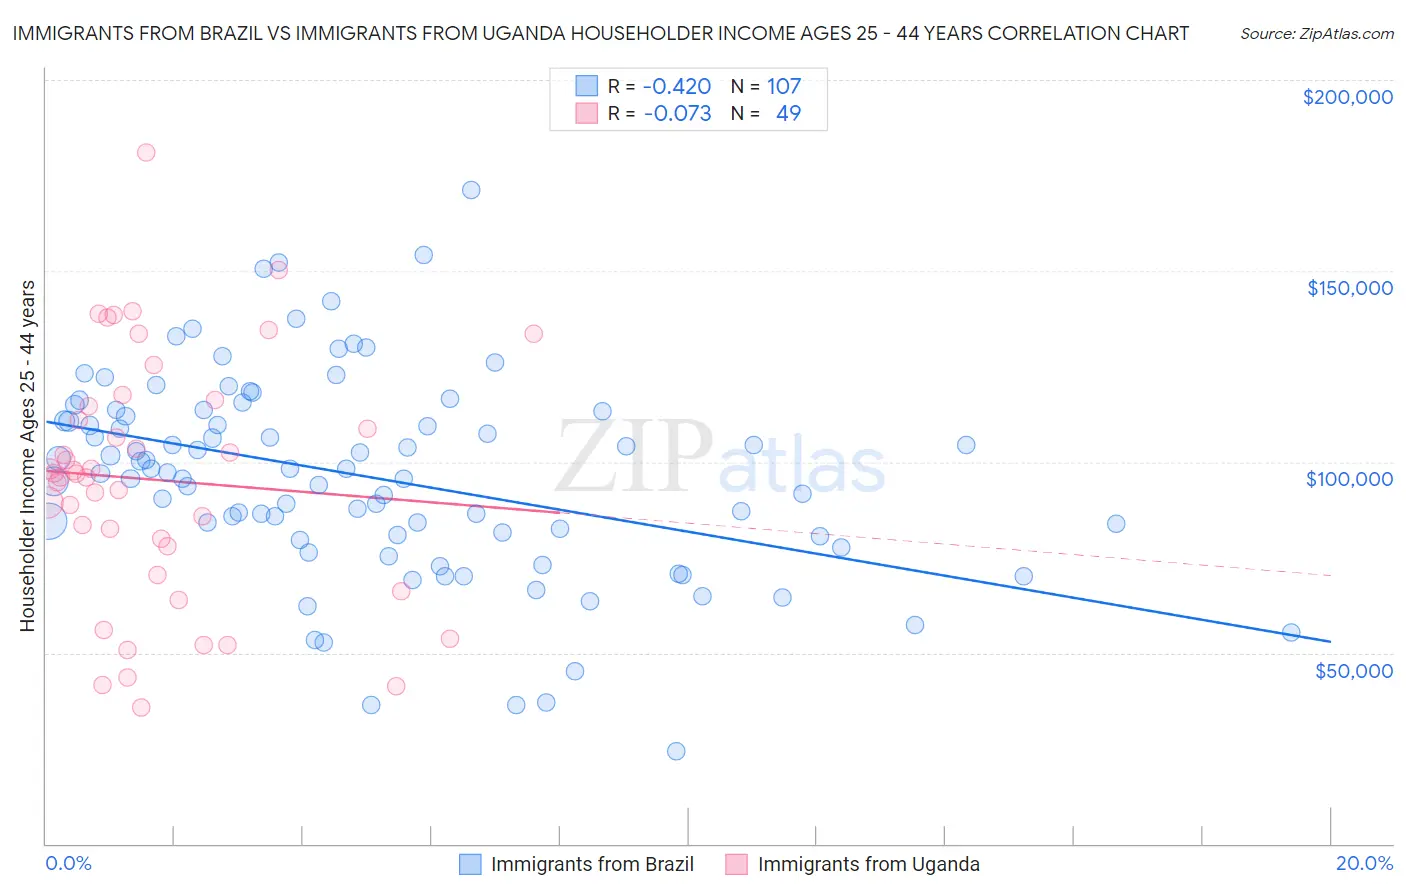 Immigrants from Brazil vs Immigrants from Uganda Householder Income Ages 25 - 44 years